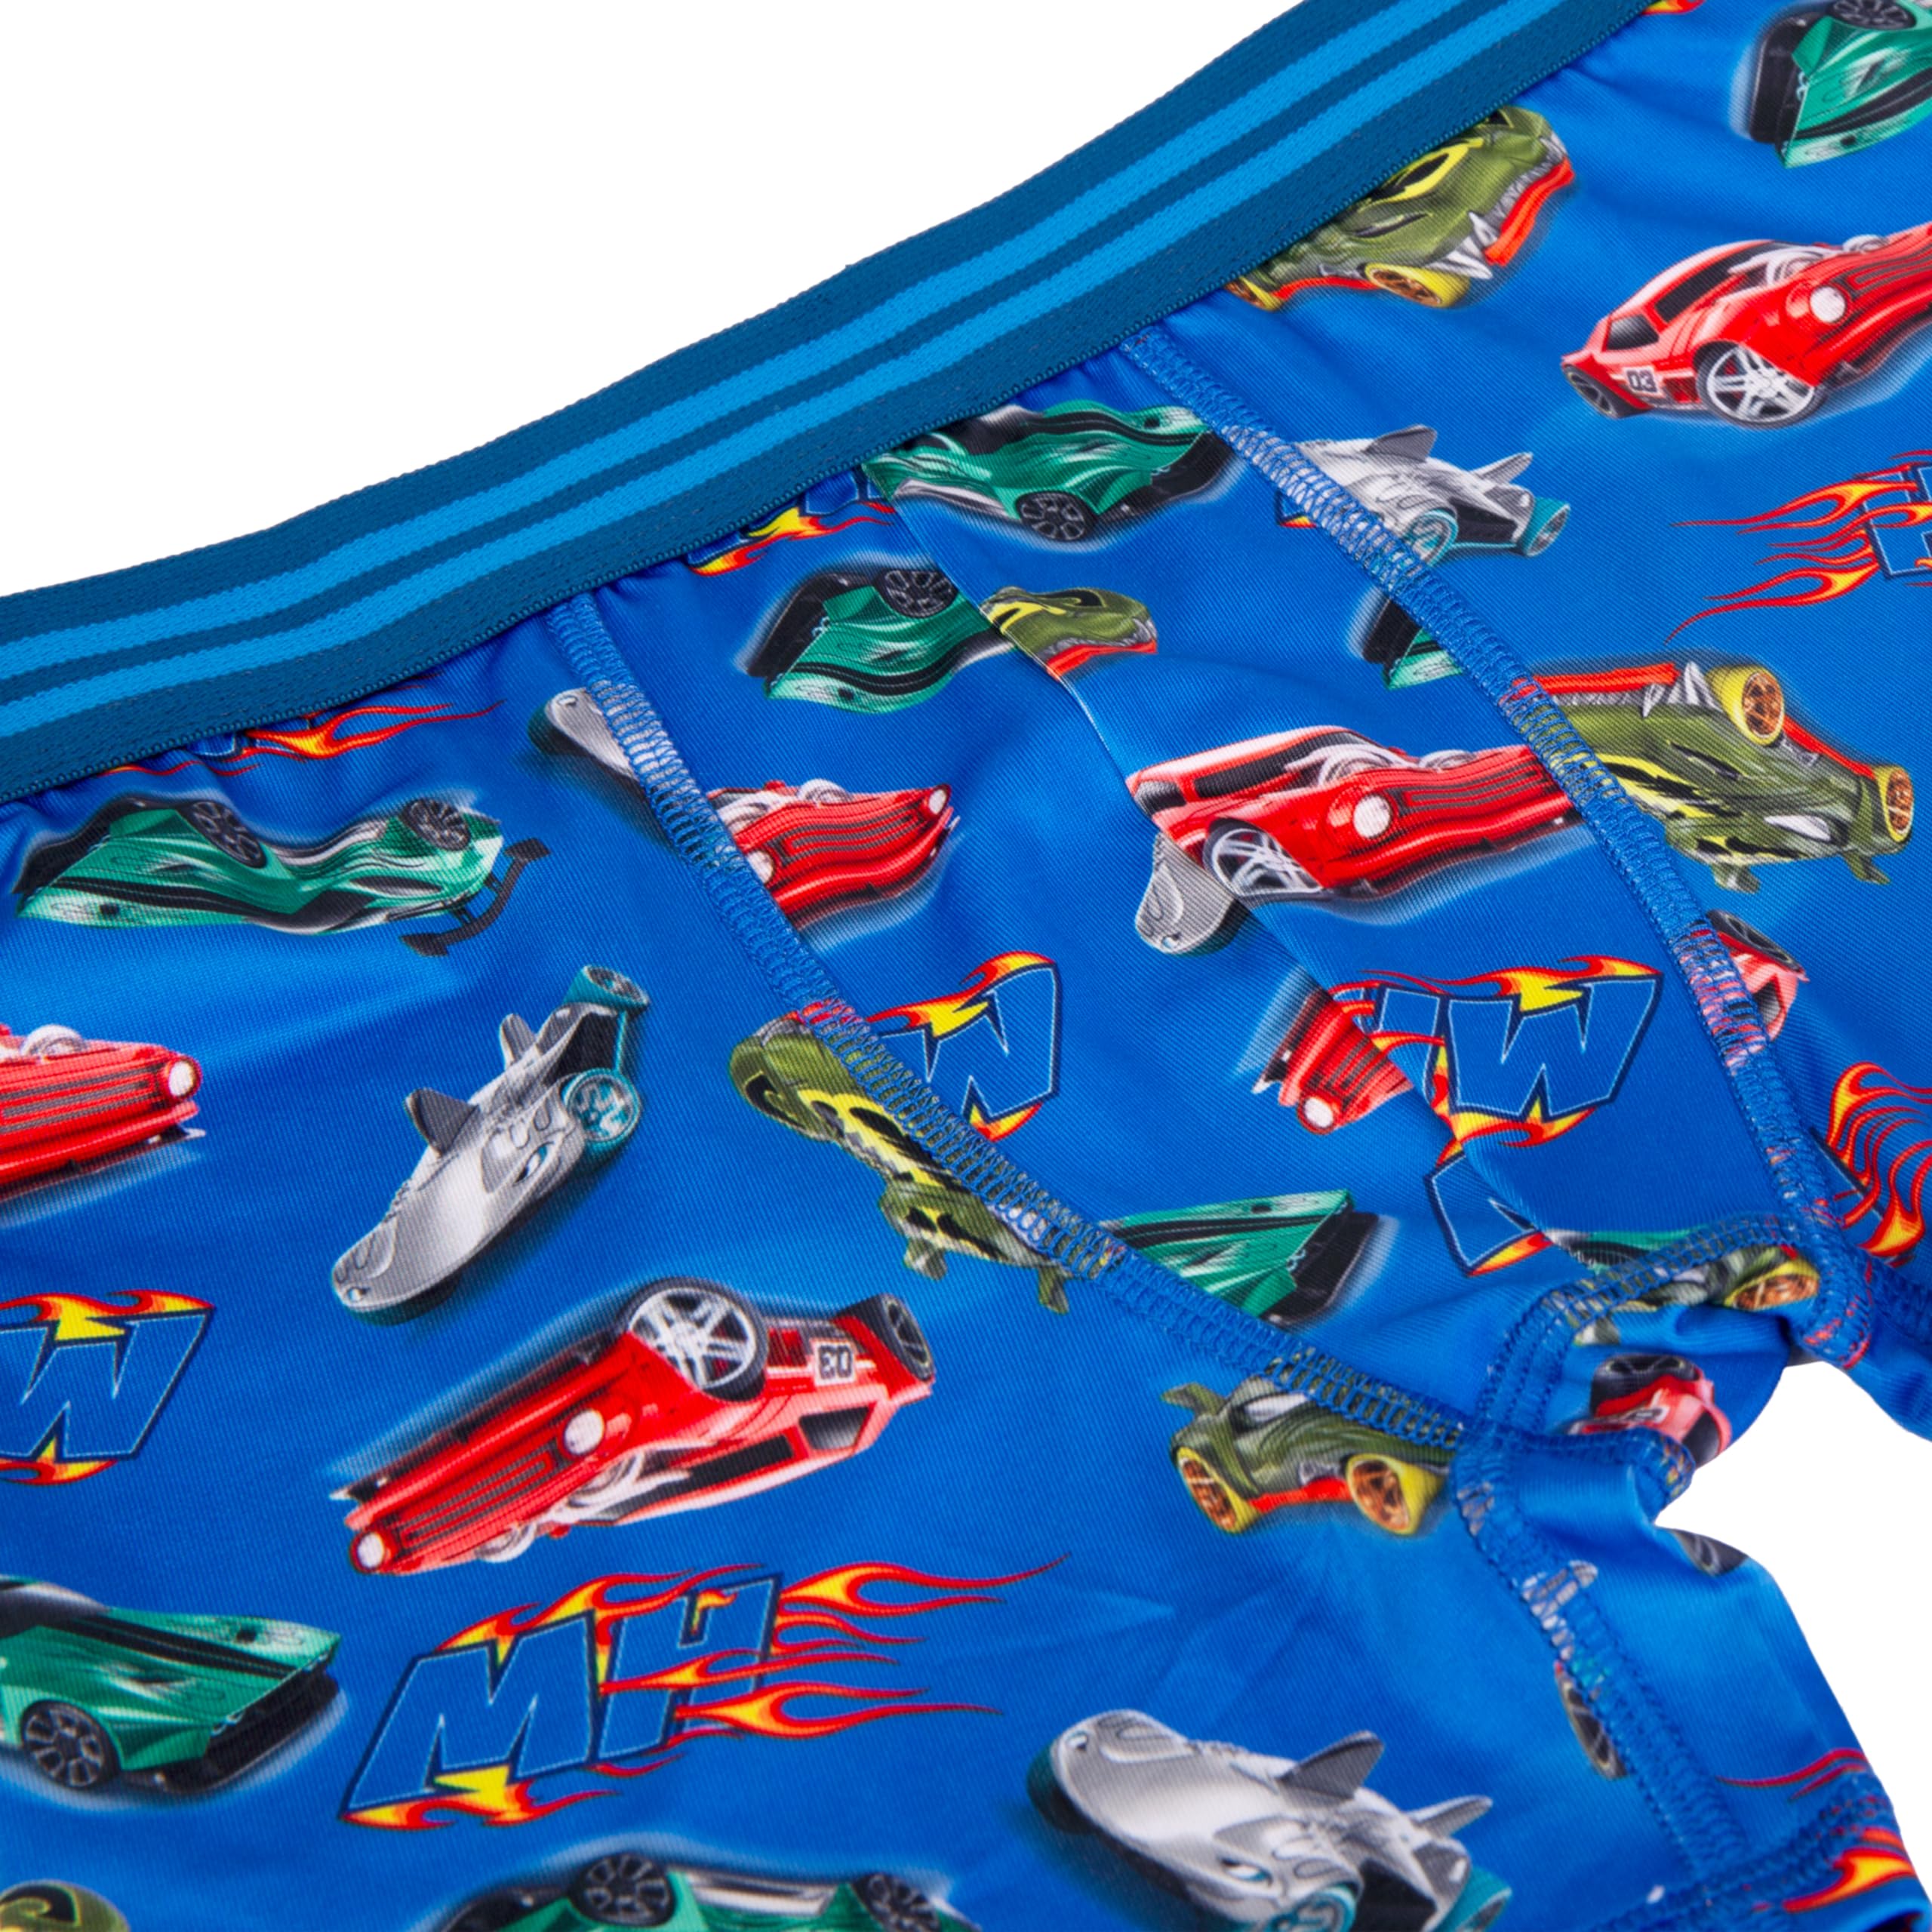 Hot Wheels Boys' Underwear Multipacks Available in Sizes 2/3t, 4t, 4, 6, 8 and 10